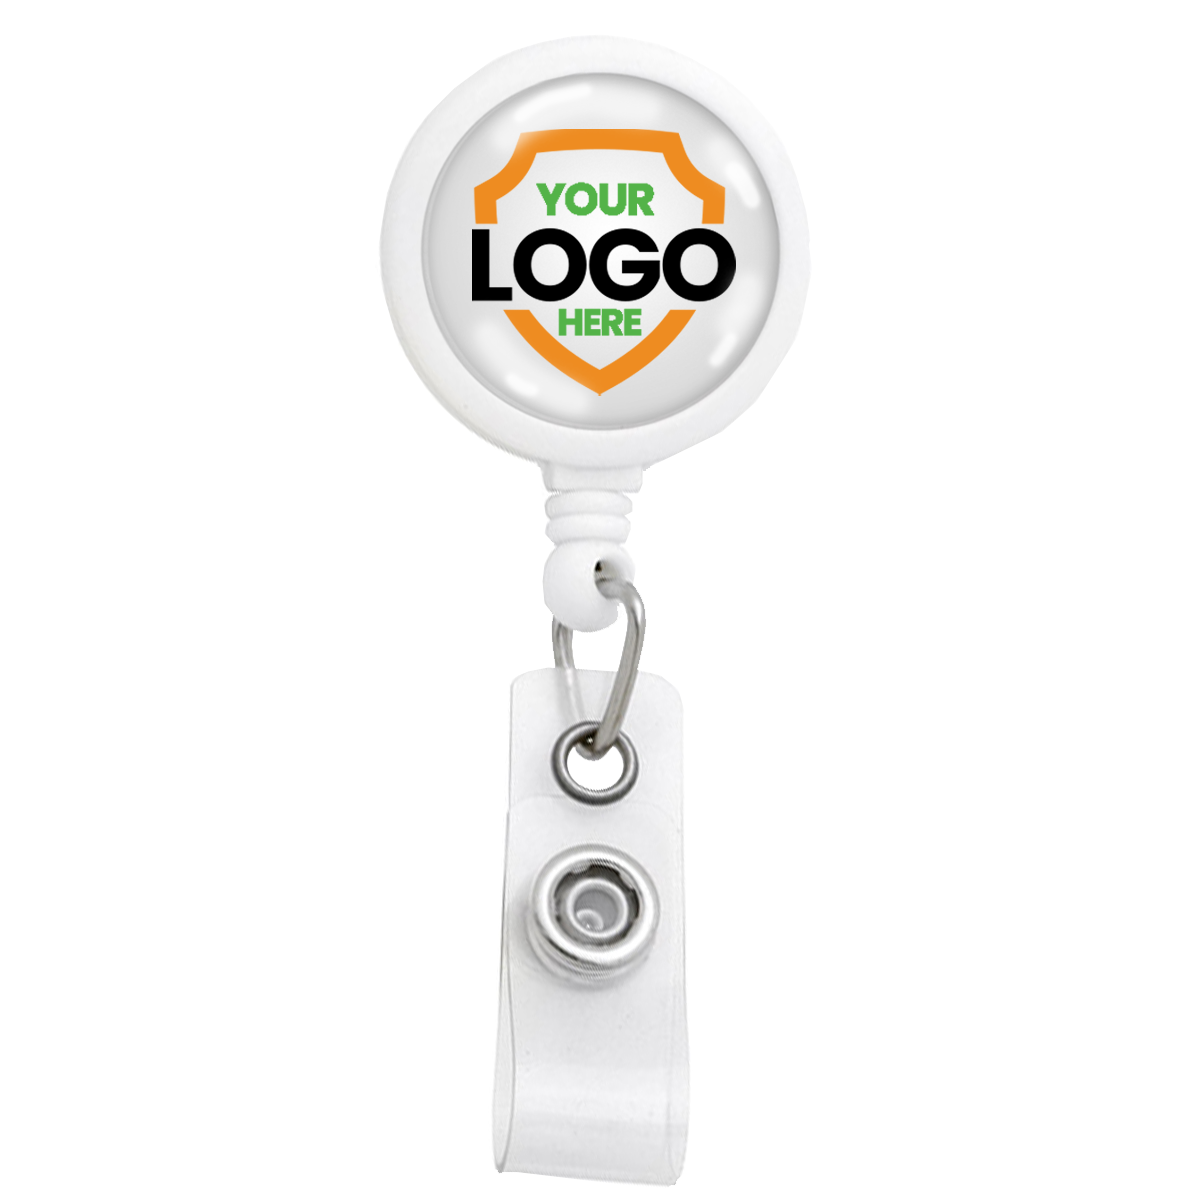 A Custom Max Label Badge Reel with 1 Inch Smooth Face and Swivel Spring Clip - Personalize with Your Logo, featuring a shield design with the text "YOUR LOGO HERE," perfect for custom badge reels to promote brand awareness and maintain a professional image.